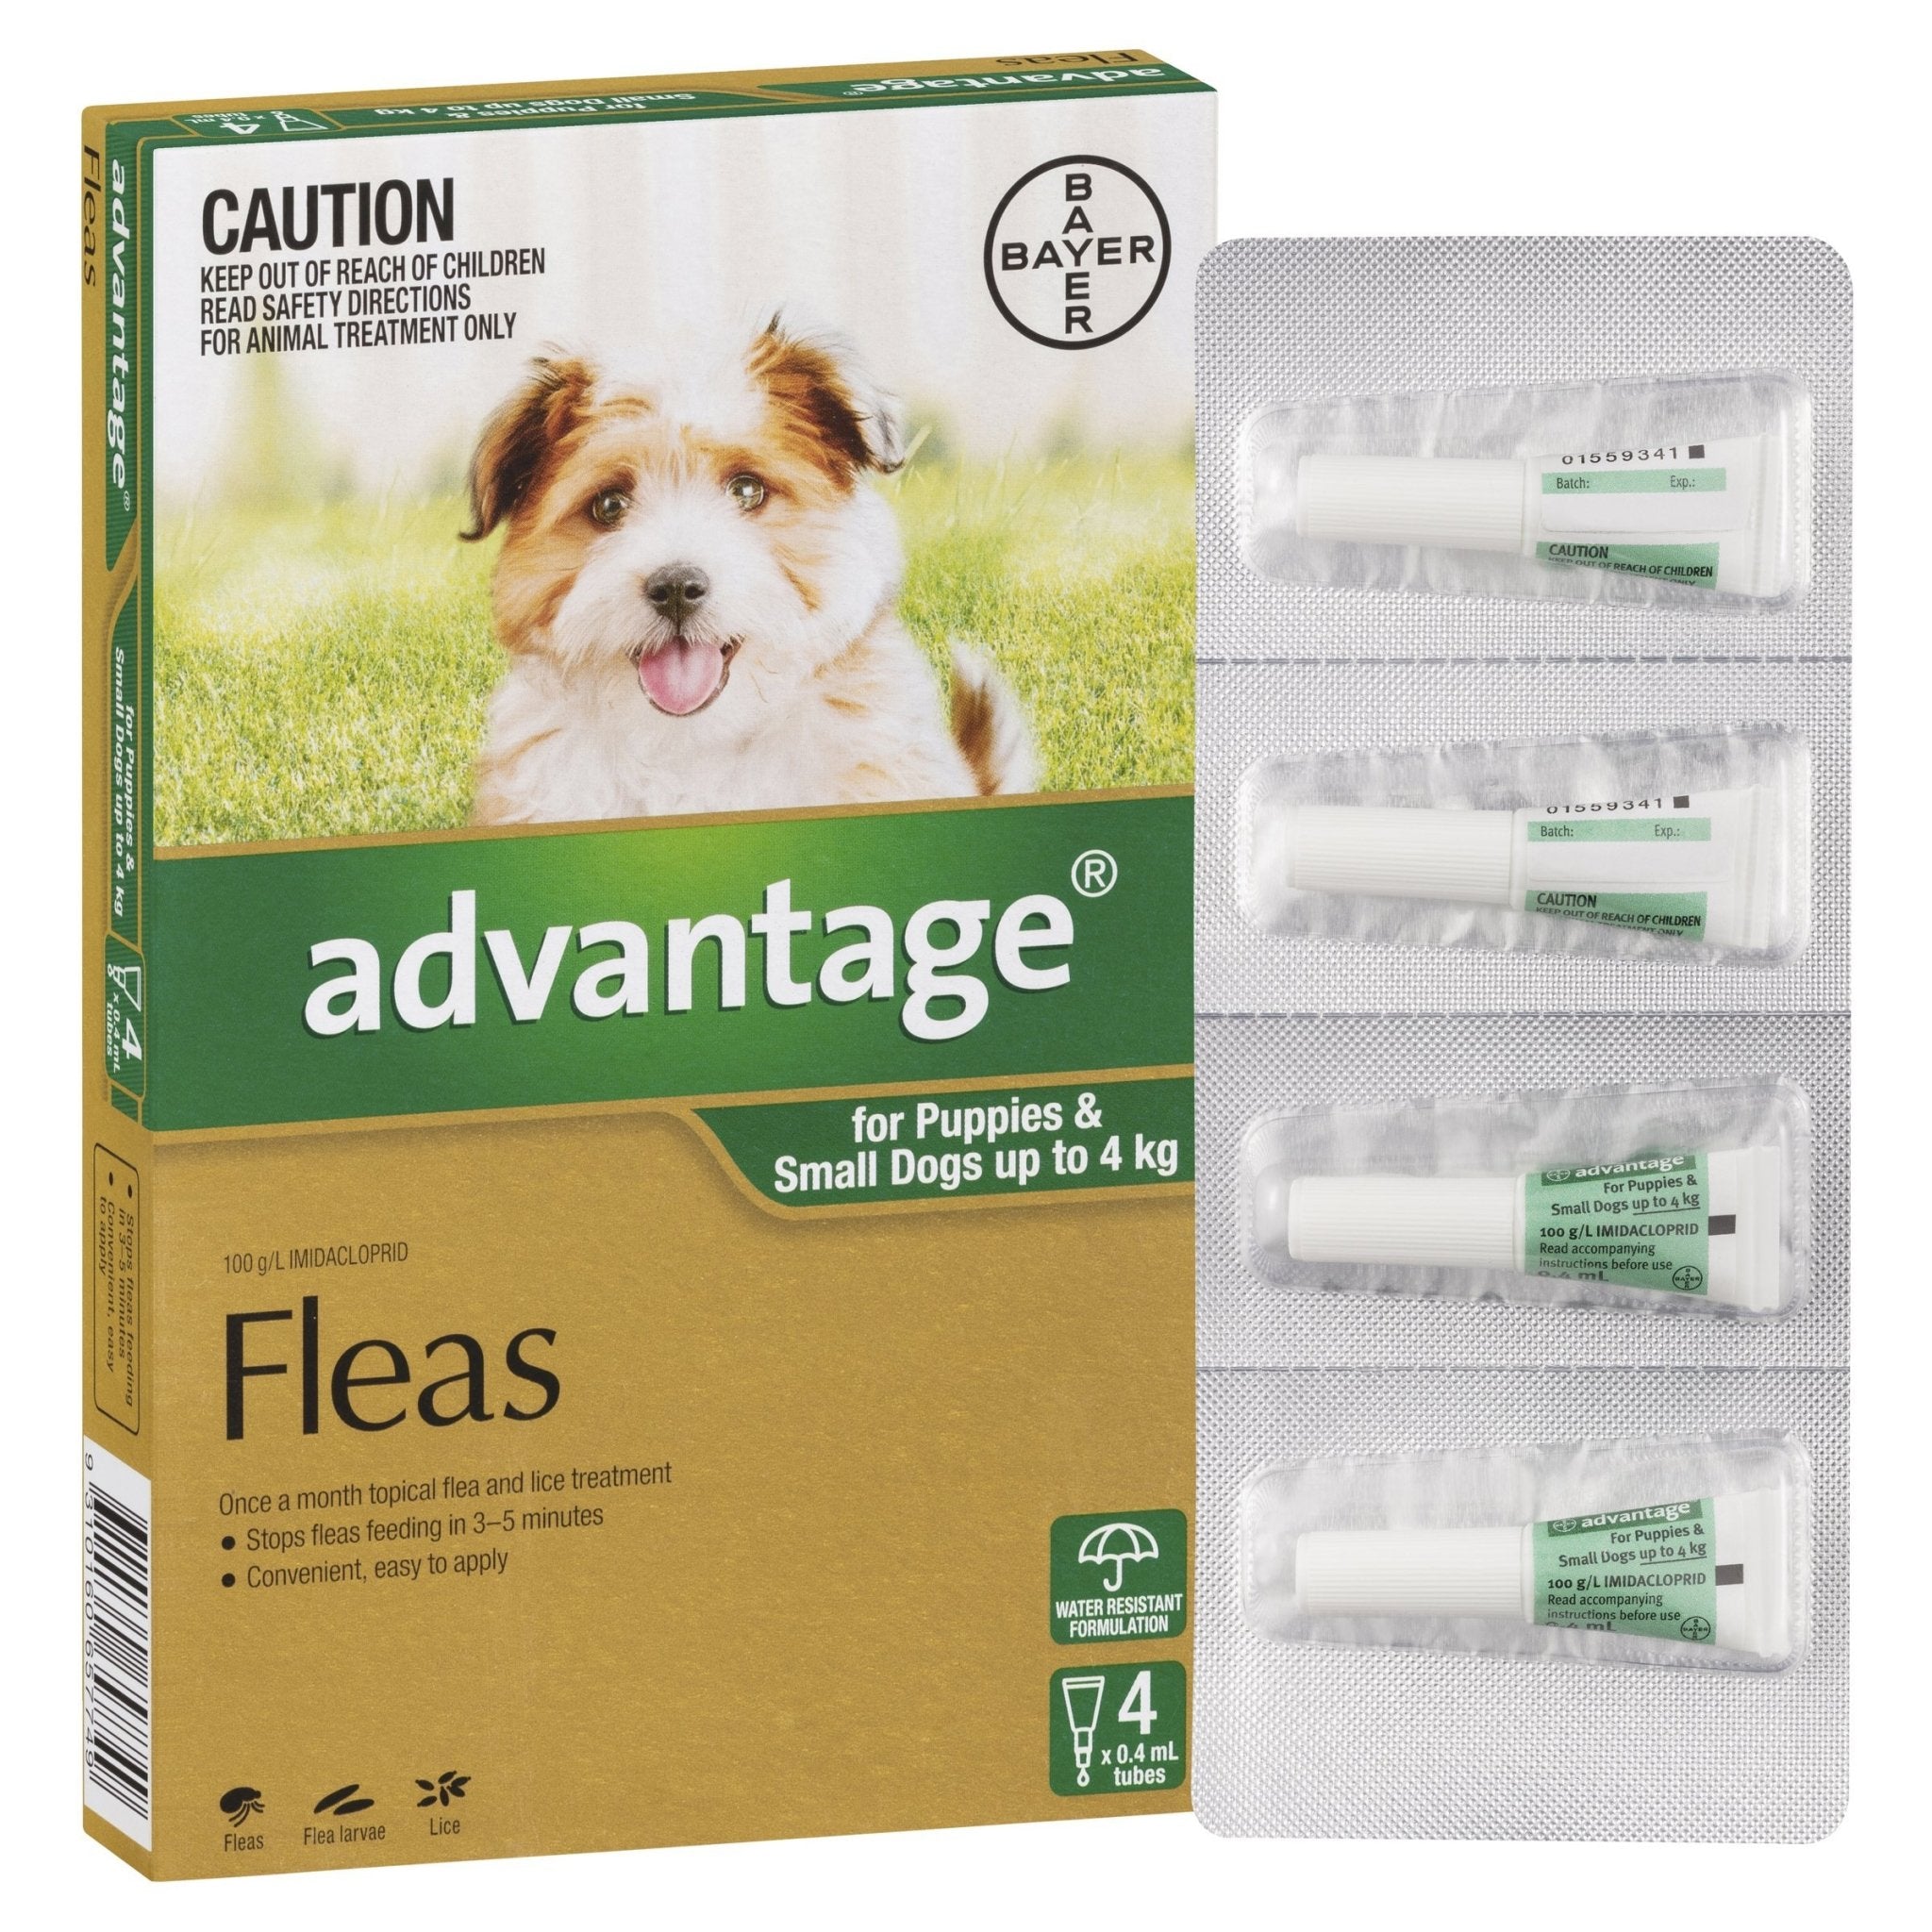 Advantage Fleas for Puppies & Small Dogs up to 4kg